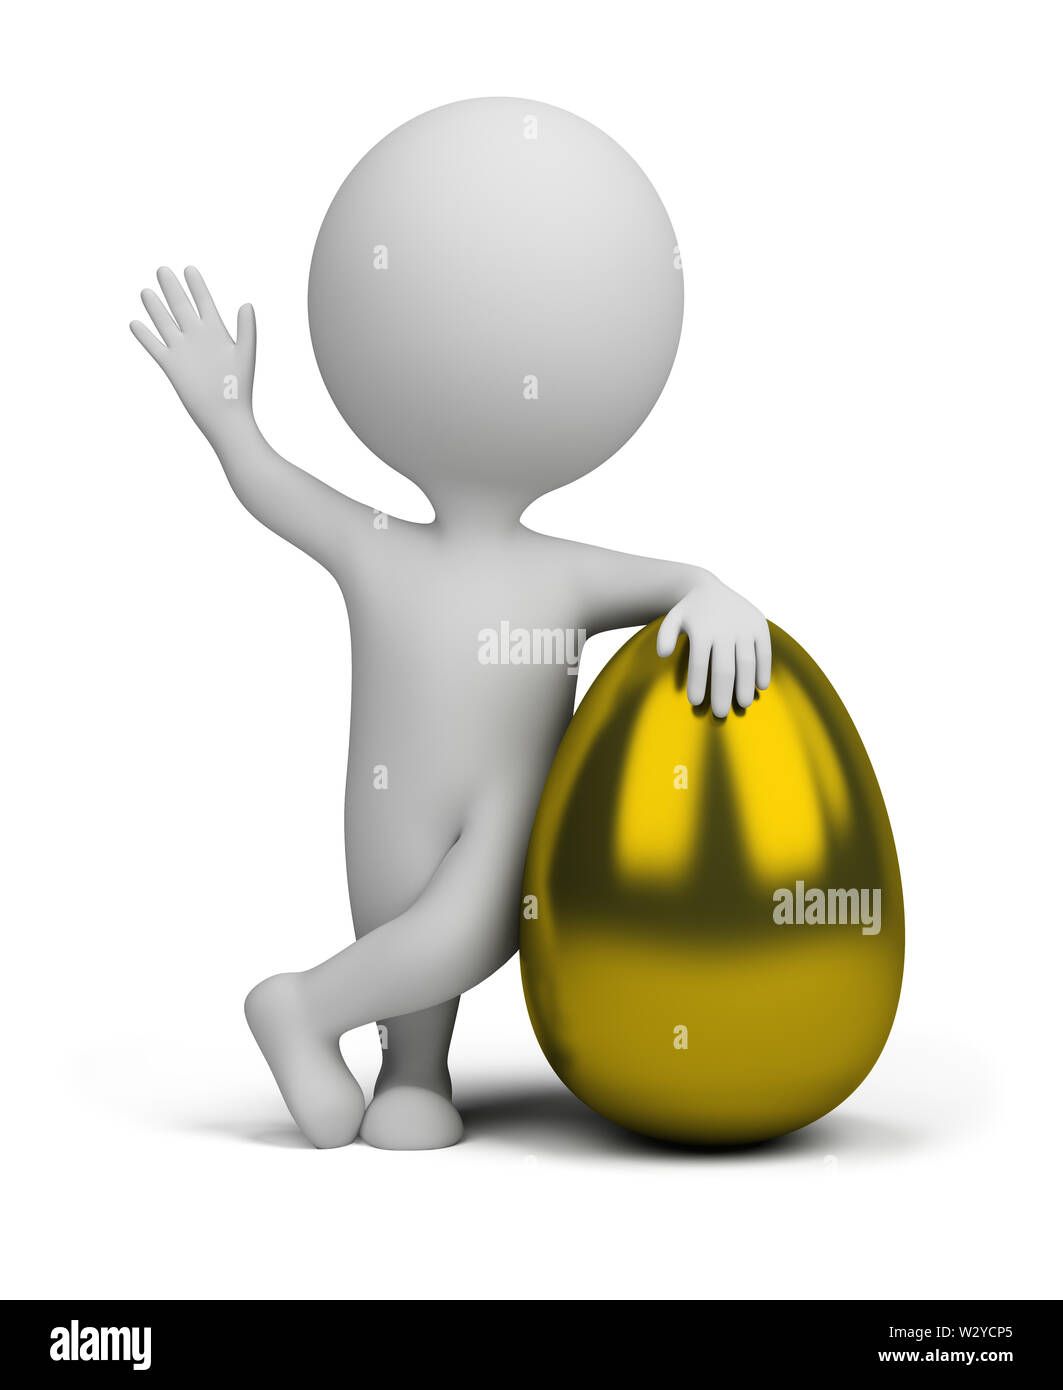 3d small person standing next to a golden egg. 3d image. Isolated white background. Stock Photo